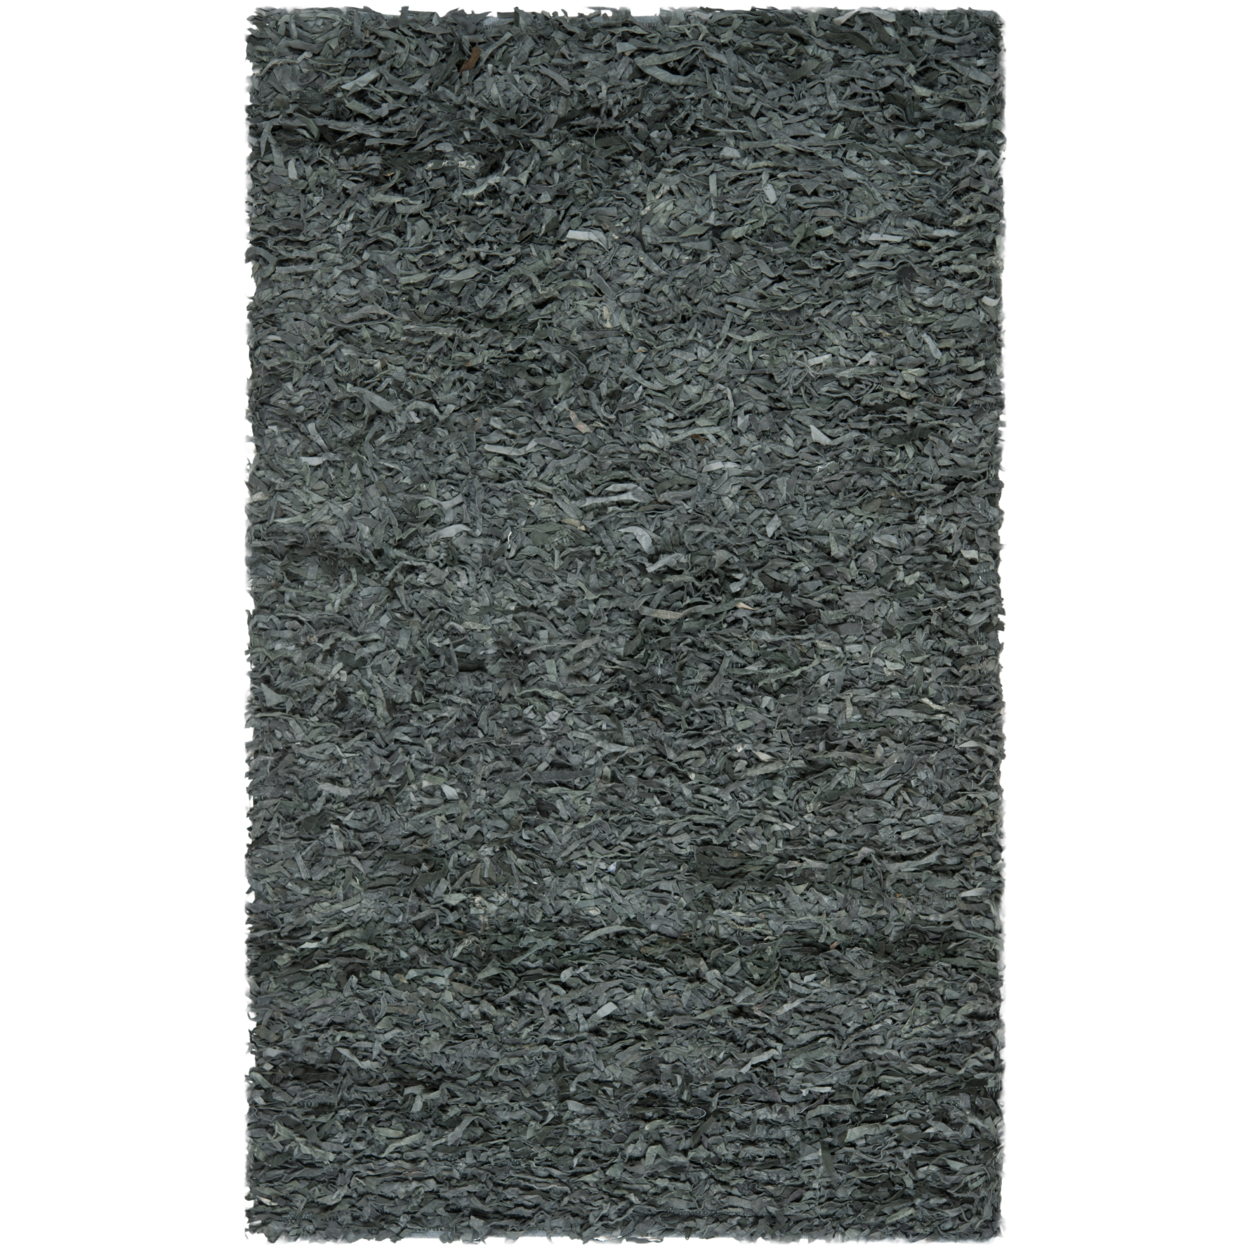 SAFAVIEH Leather Shag LSG511N Hand-knotted Grey Rug - 6' Square